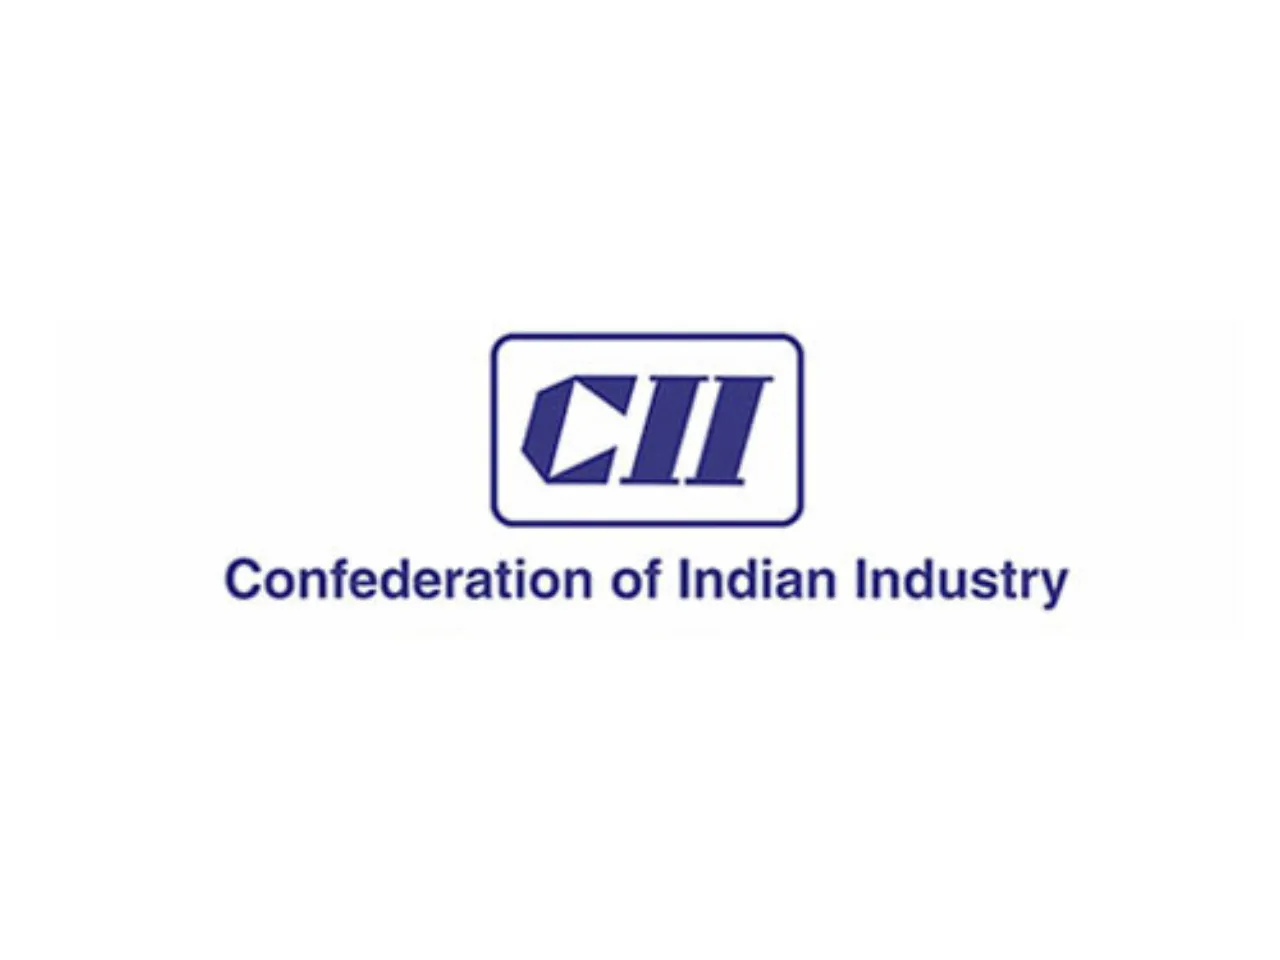 CII unveils Corporate Governance Charter for startups